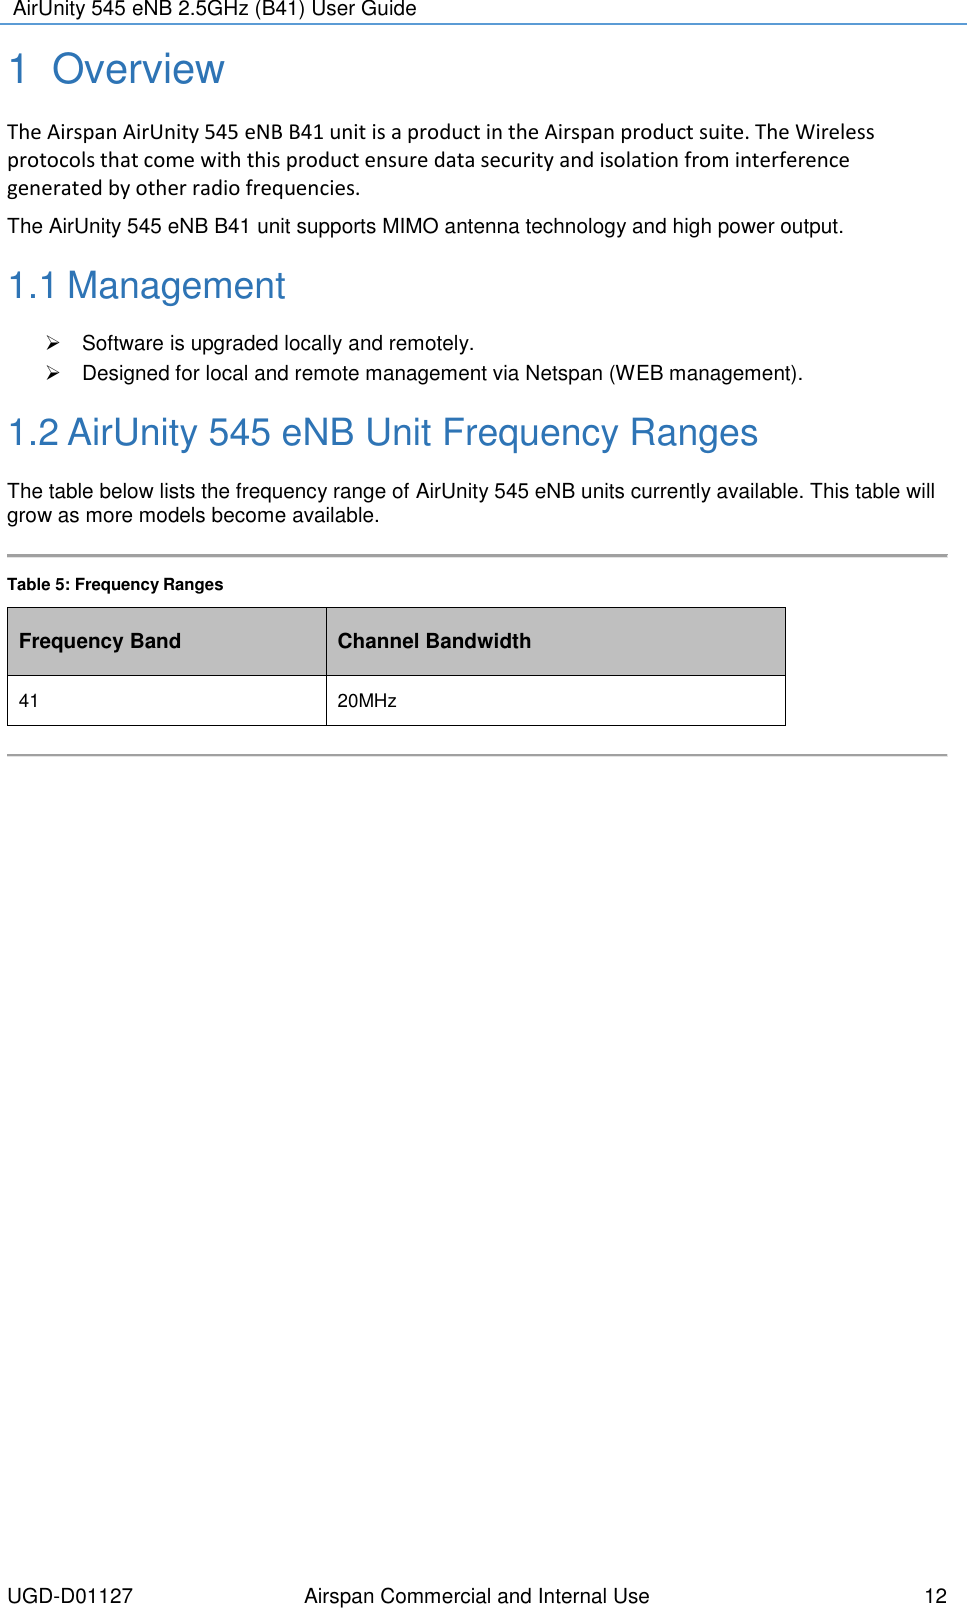  AirUnity 545 eNB 2.5GHz (B41) User Guide  UGD-D01127 Airspan Commercial and Internal Use  12 1  Overview The Airspan AirUnity 545 eNB B41 unit is a product in the Airspan product suite. The Wireless protocols that come with this product ensure data security and isolation from interference generated by other radio frequencies. The AirUnity 545 eNB B41 unit supports MIMO antenna technology and high power output.  1.1 Management   Software is upgraded locally and remotely.   Designed for local and remote management via Netspan (WEB management). 1.2 AirUnity 545 eNB Unit Frequency Ranges The table below lists the frequency range of AirUnity 545 eNB units currently available. This table will grow as more models become available.  Table 5: Frequency Ranges Frequency Band Channel Bandwidth 41 20MHz    